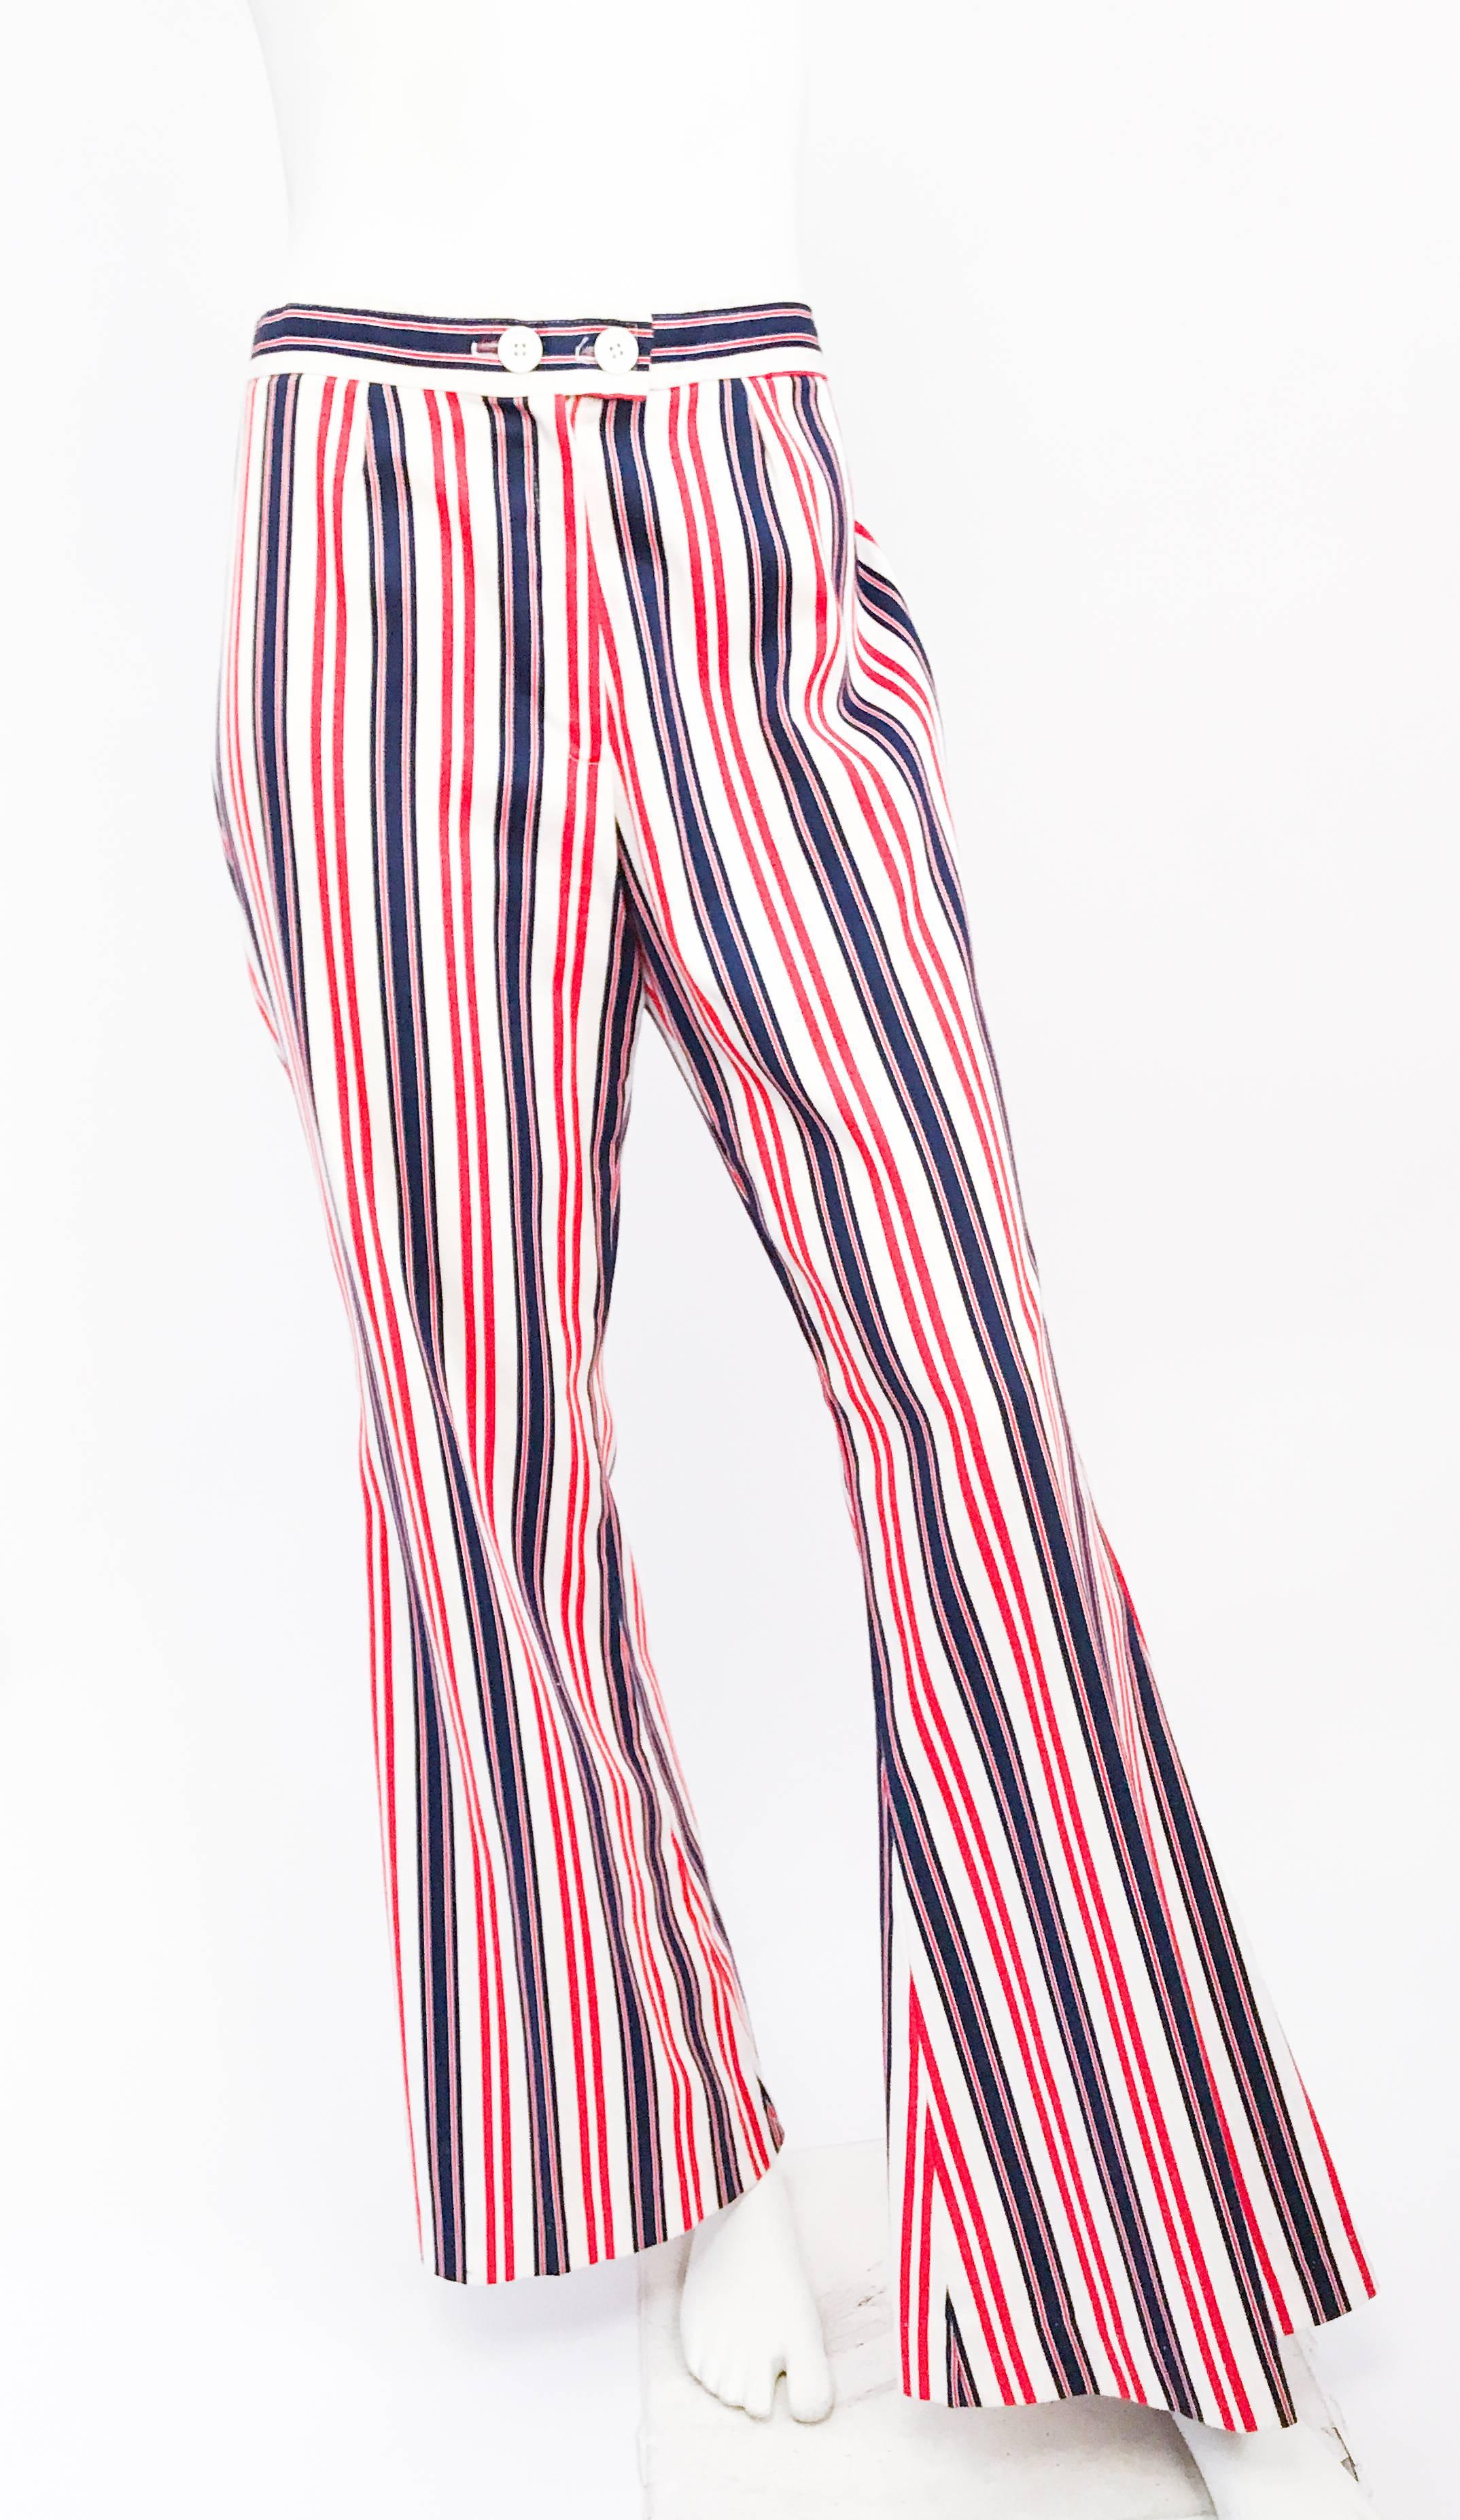 1960s Summer of Love Stripped Flared Pants. Stripped flared pants with red, white, and blue stripes. These pants have been part of The De Young Museum's Summer of Love exhibit in San Francisco (in 2017) as shown in photos. 